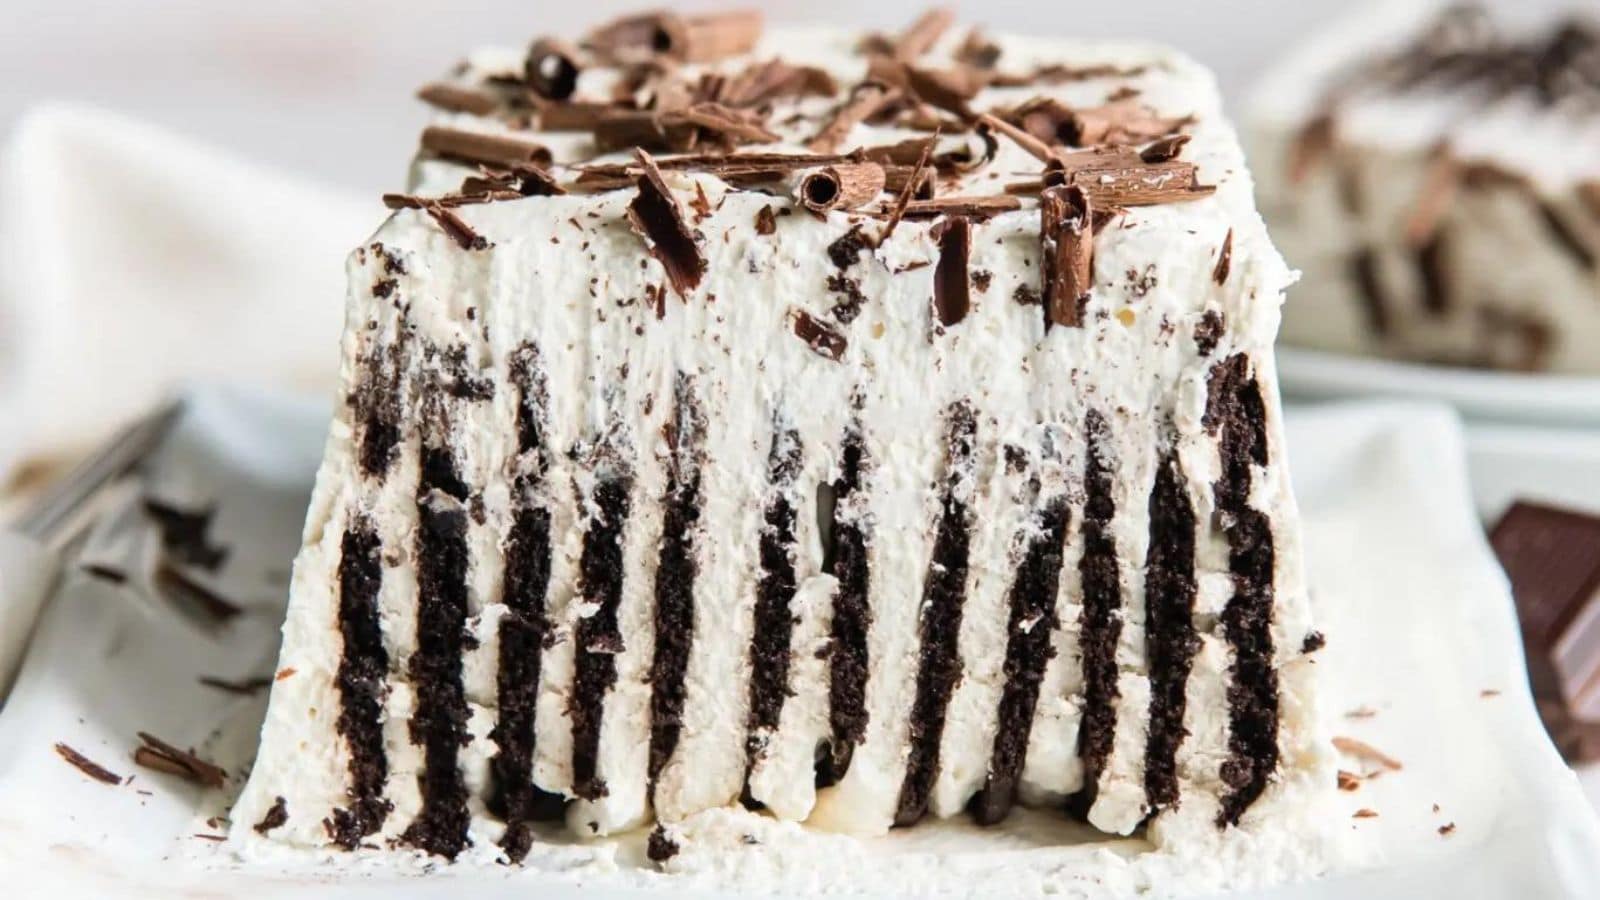 Layers of chocolate wafers and whipped cream to form a no-bake cake.